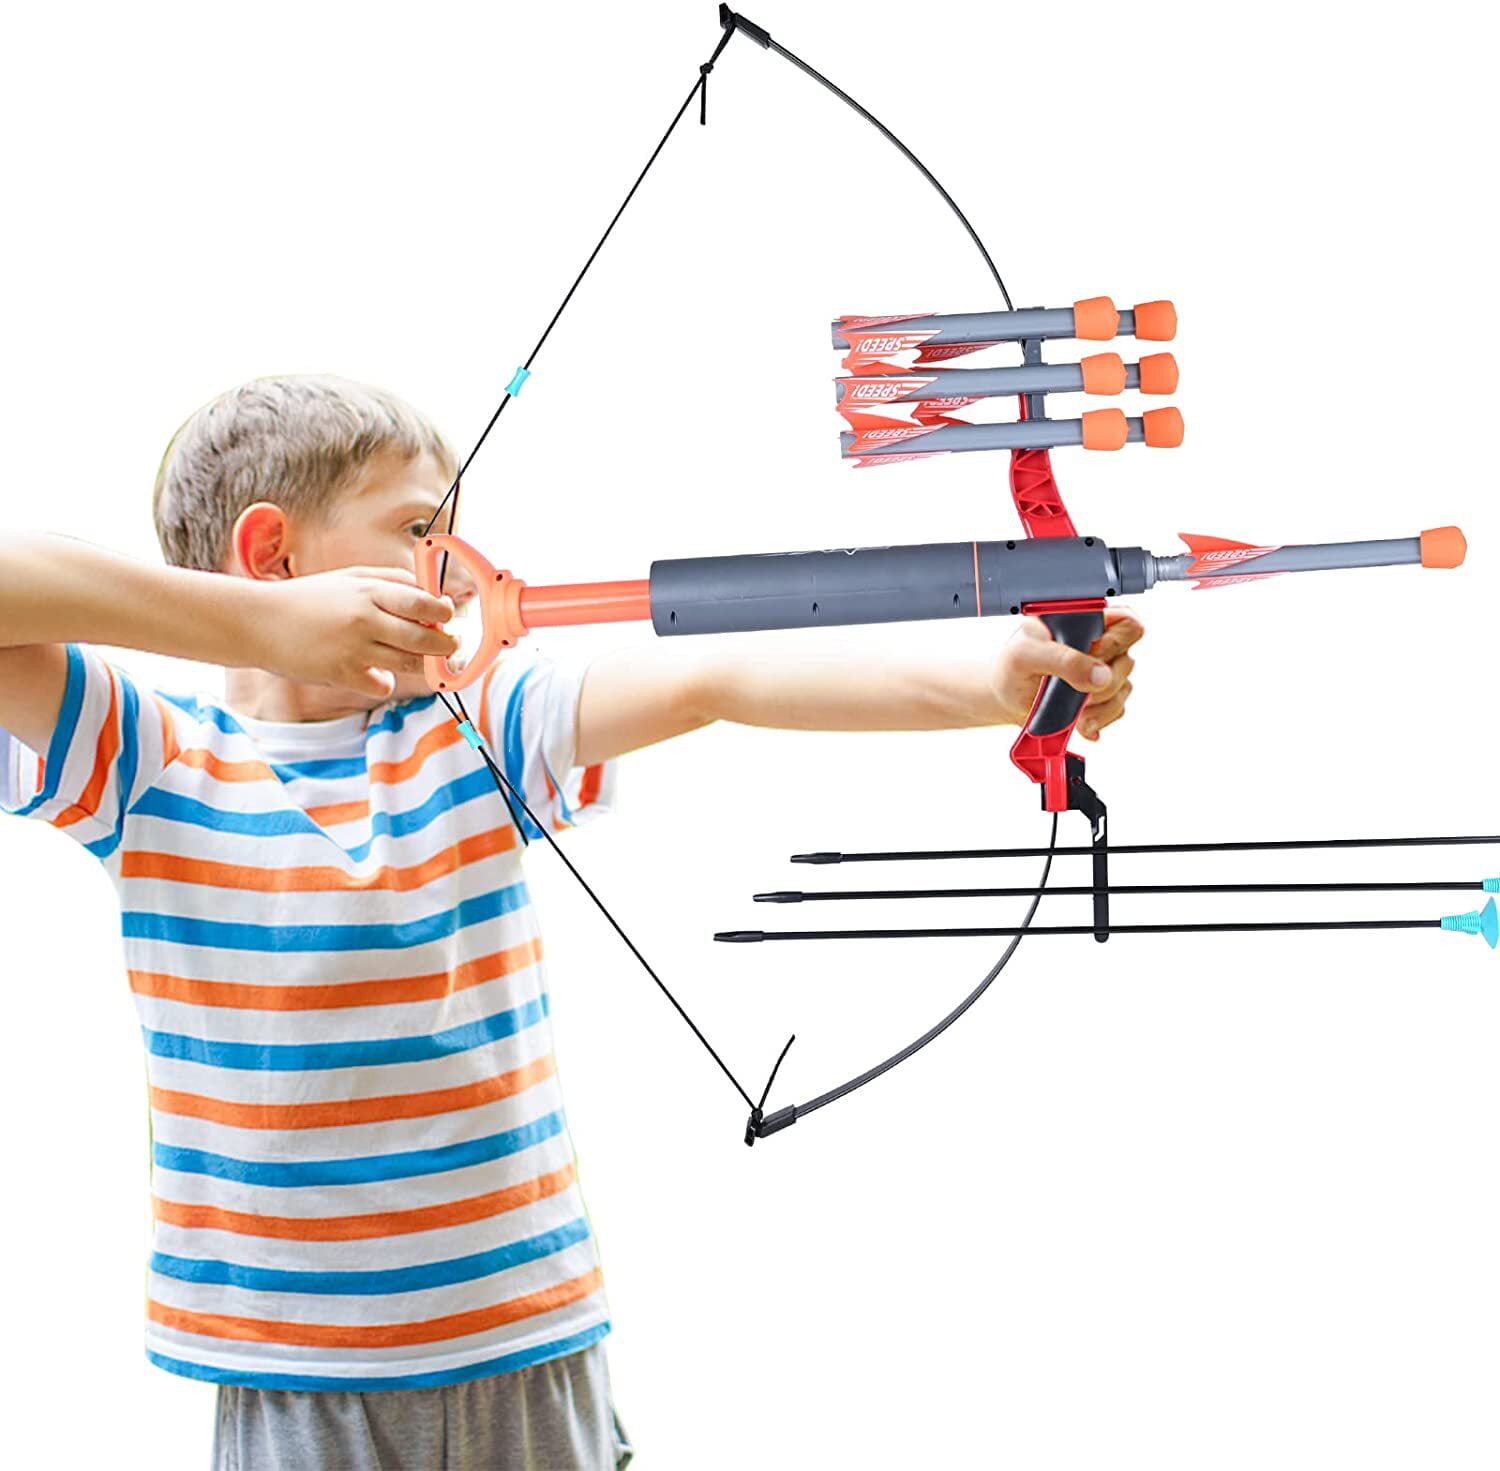 Elong Fiberglass Arrows Archery 24 26 Inch Target Shooting Practice Safetyglass Recurve Bows Suitable for Youth Children Woman Beginner 